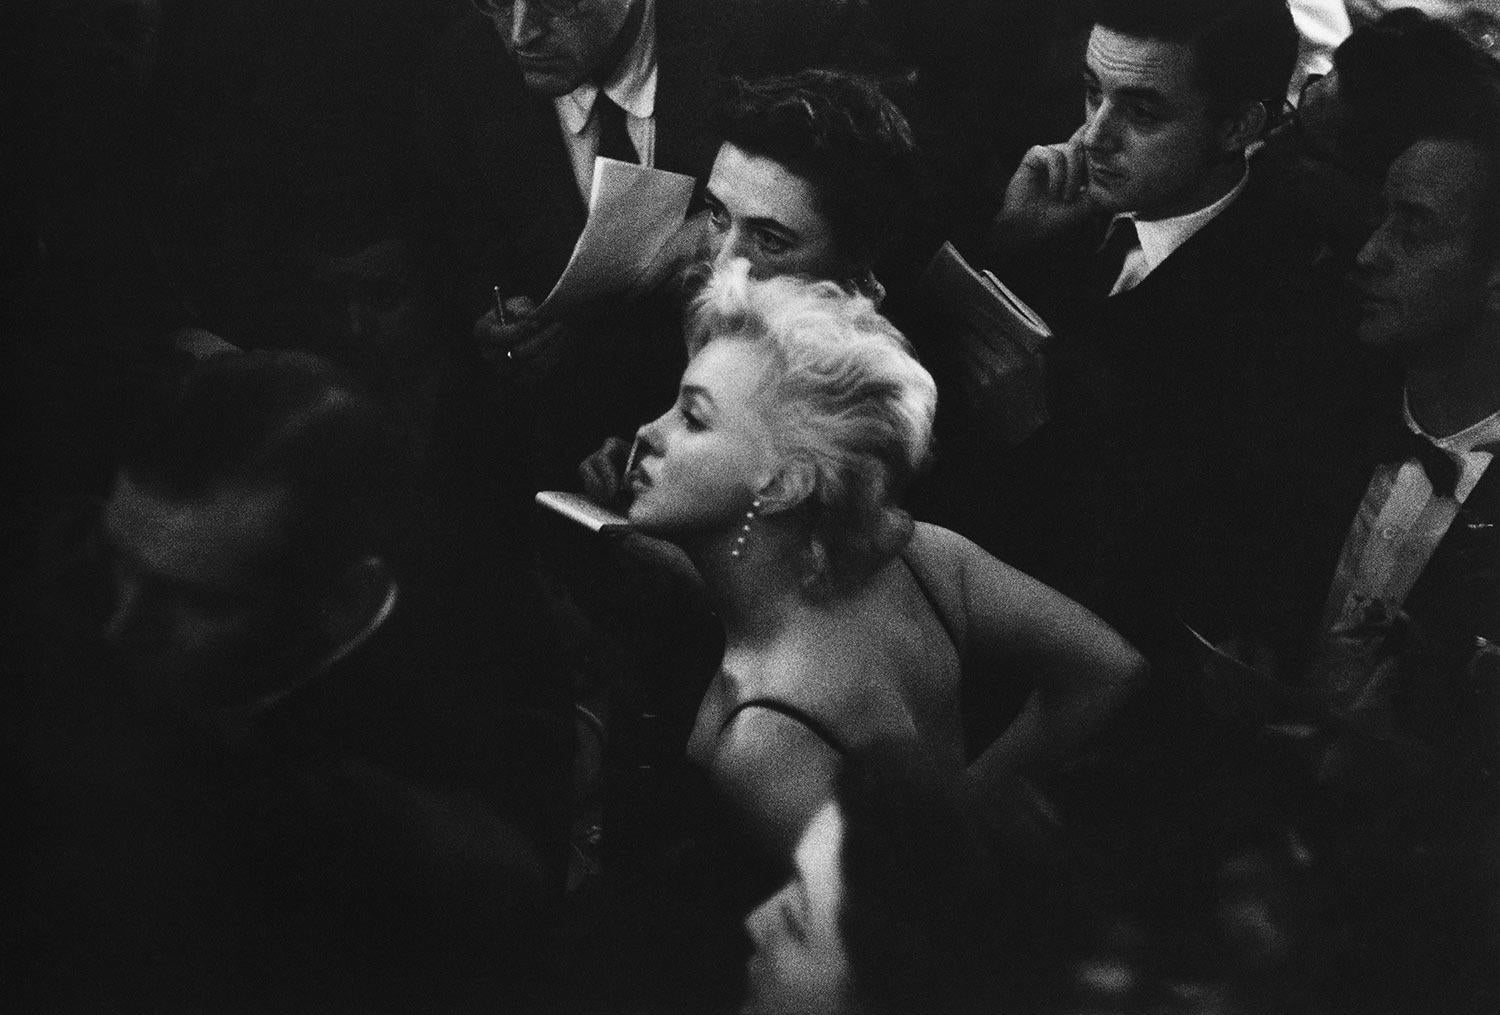 Marilyn Monroe in the Waldorf Astoria Ballroom in New York City, 1956.

All available sizes and editions:
20" x 24", Edition of 25 + 3 Artist Proofs
24" x 34", Edition of 25 + 3 Artist Proofs

"Eve Arnold, born in 1912 to Russian-immigrant parents